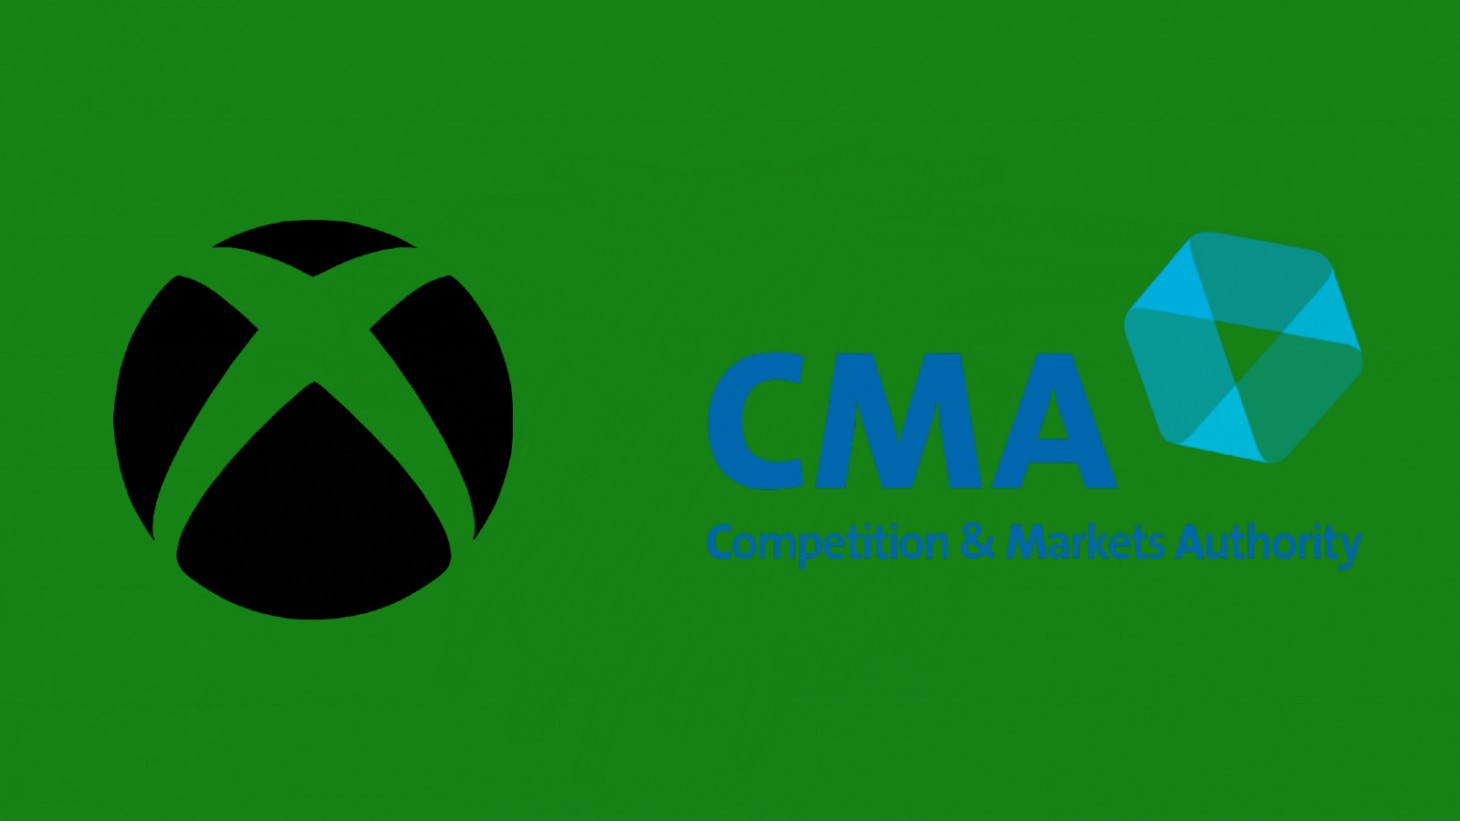 Xbox Microsoft CMA UK Appeal negotiation cloud gaming activision blizzard acquisition